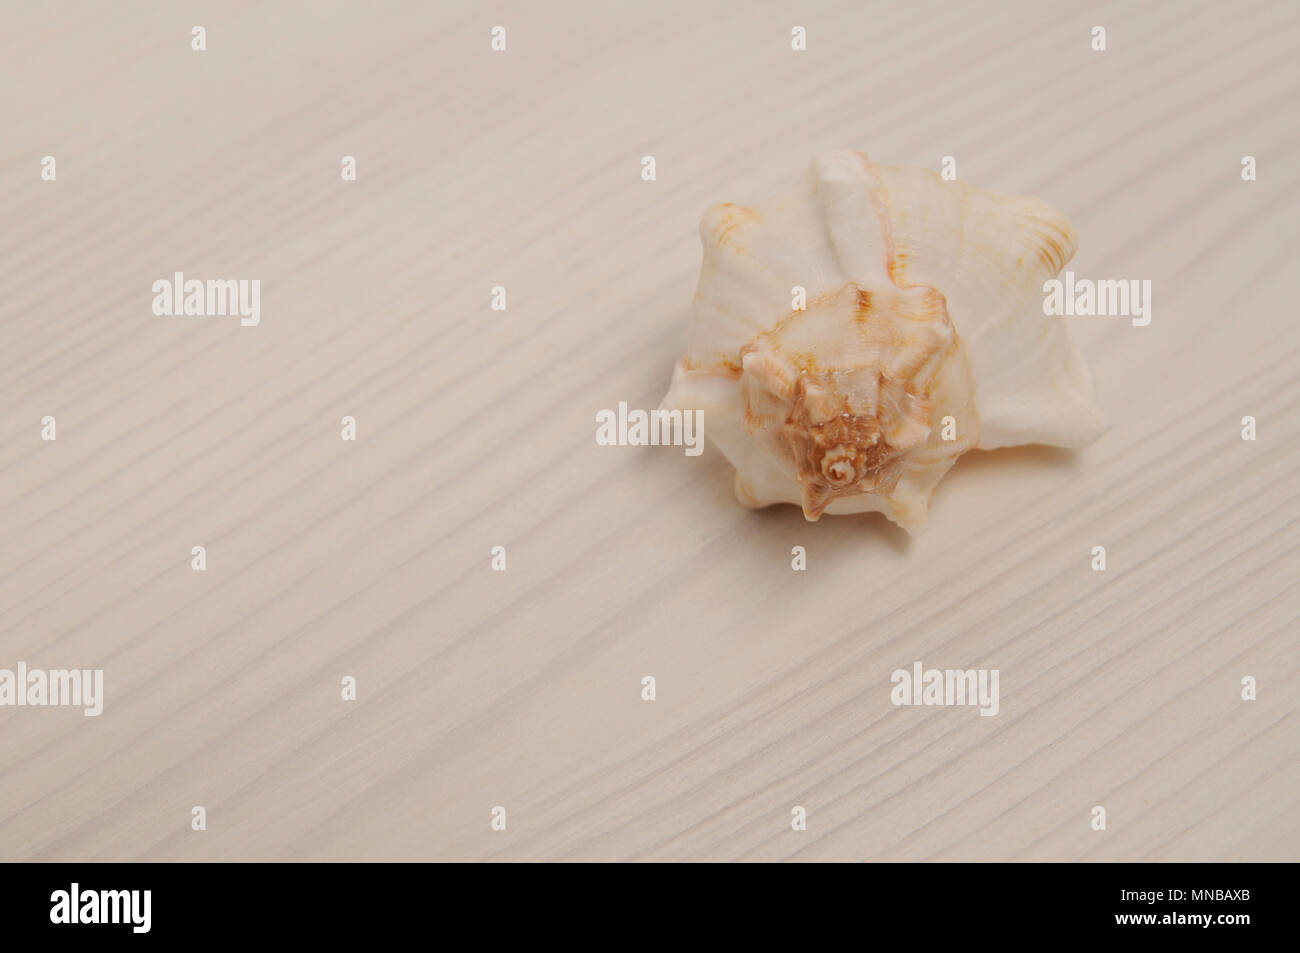 Seashell on wooden backround with copy space Stock Photo